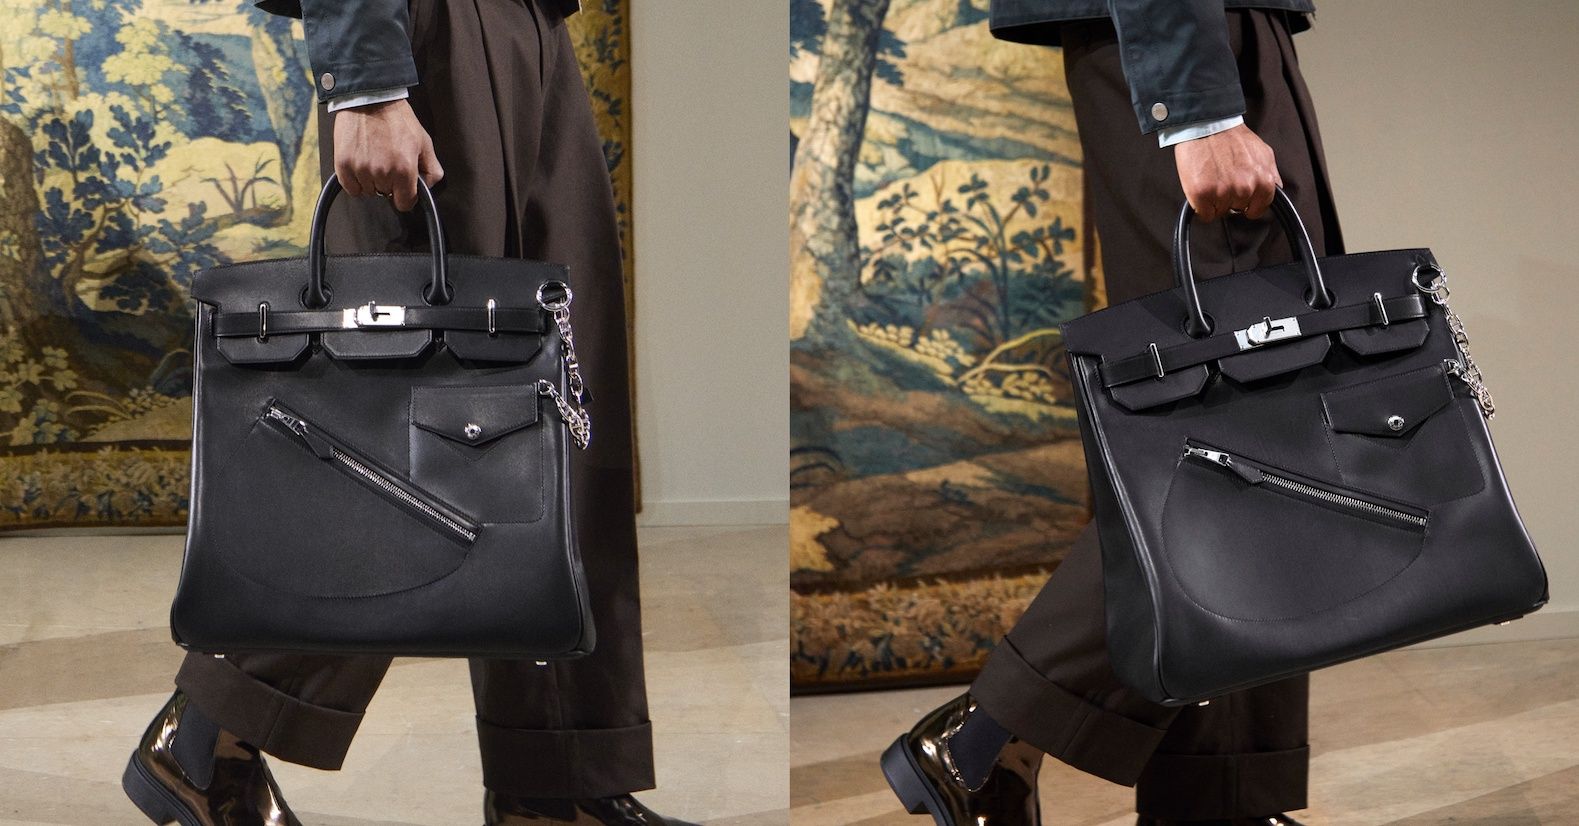 Here’s what we know about the Rock, the new Hermes Birkin bag for men